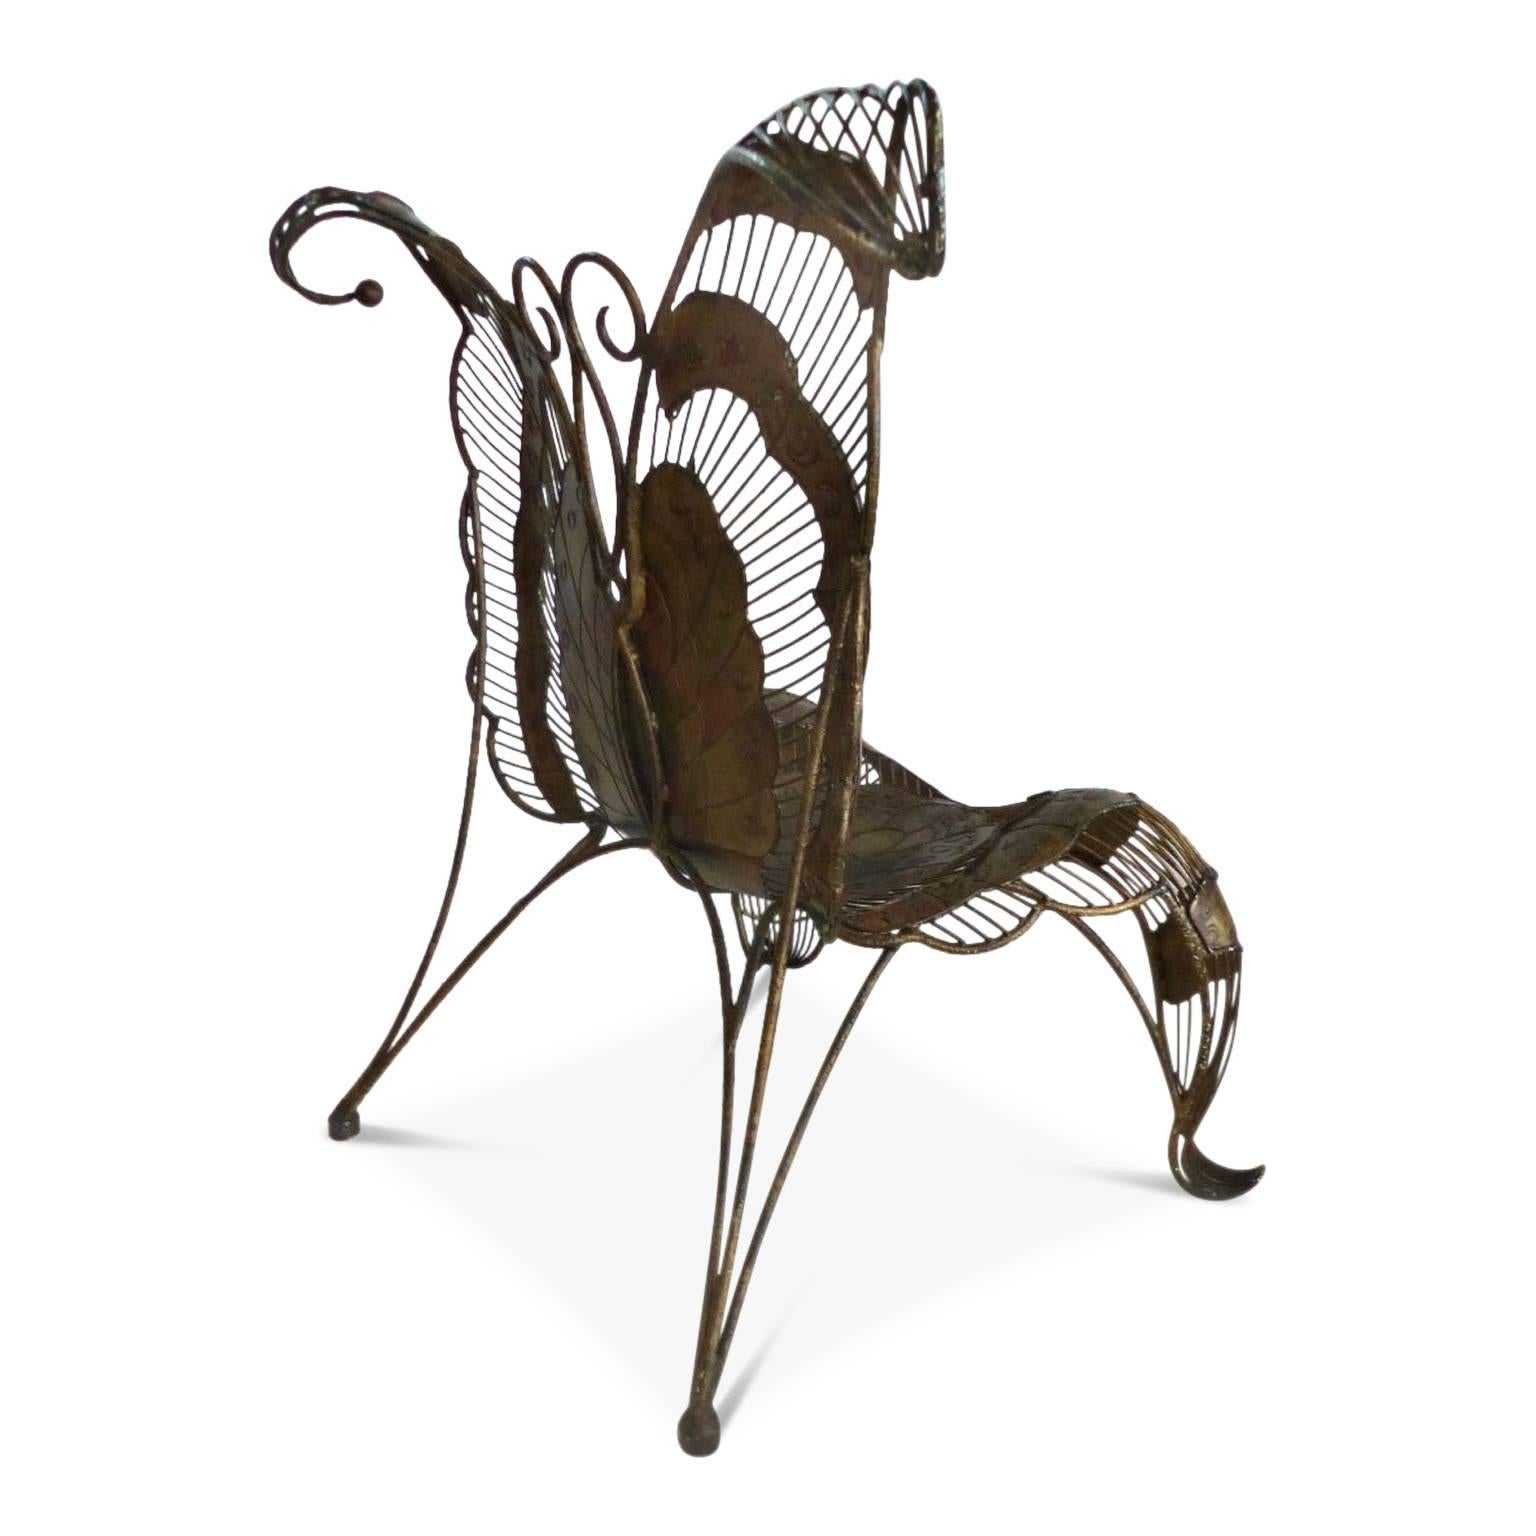 Grand sculptural lounge chair forged to create an impressive butterfly in a subtle blend of copper and gold tones with etched details on the solid components of the design. These solid parts are welded together with thin reeds of iron to create the